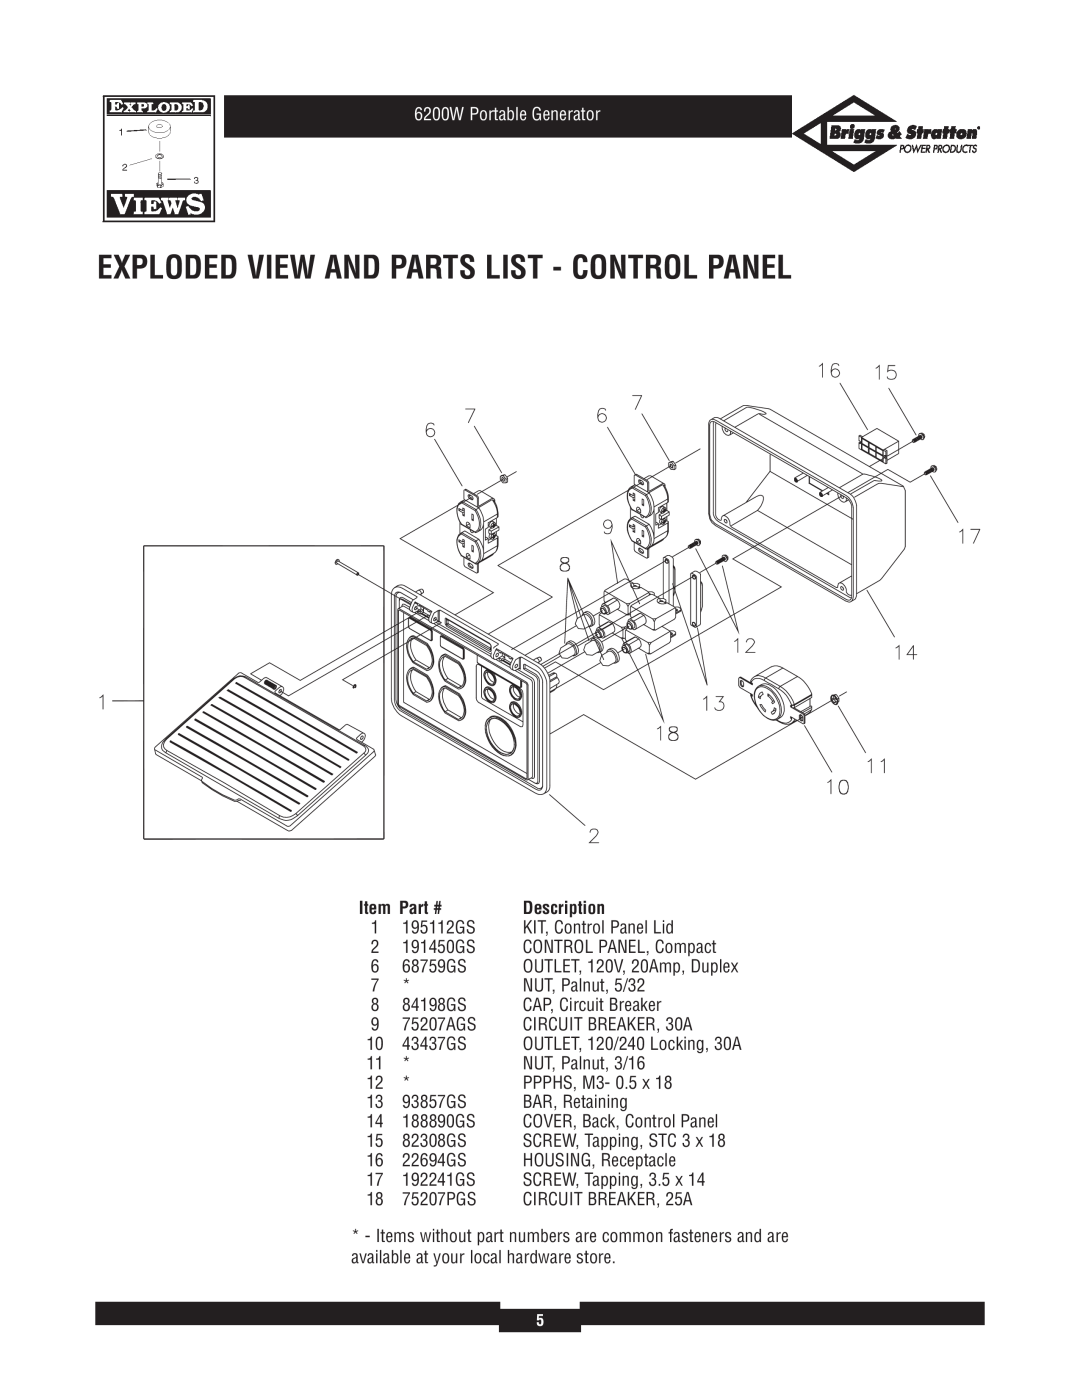 Briggs & Stratton 030211-1 manual Exploded View And Parts List - Control Panel, 6200W Portable Generator 